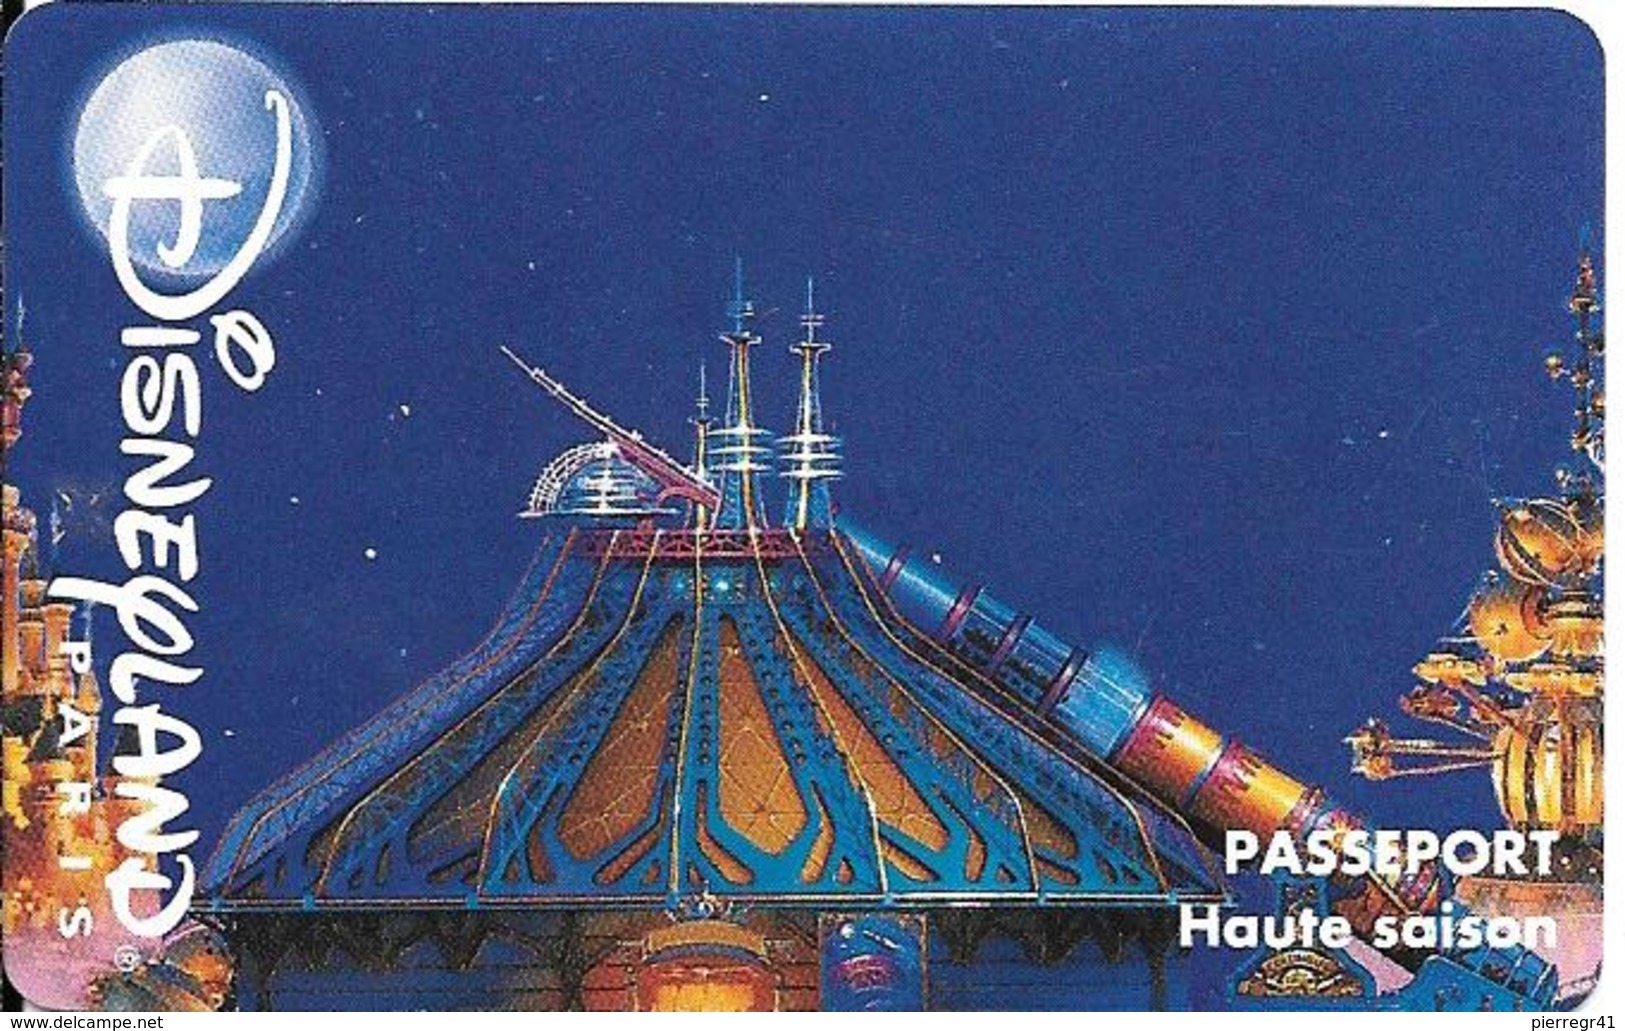 PASS-DISNEYLANDPARIS -1996-SPACE MOUNTAIN-ADULTE-V° N° S 049530 VERTICAL A Droite-MKP Valide1 Jour/GROUPE SCOLAIRE-TBE- - Passeports Disney